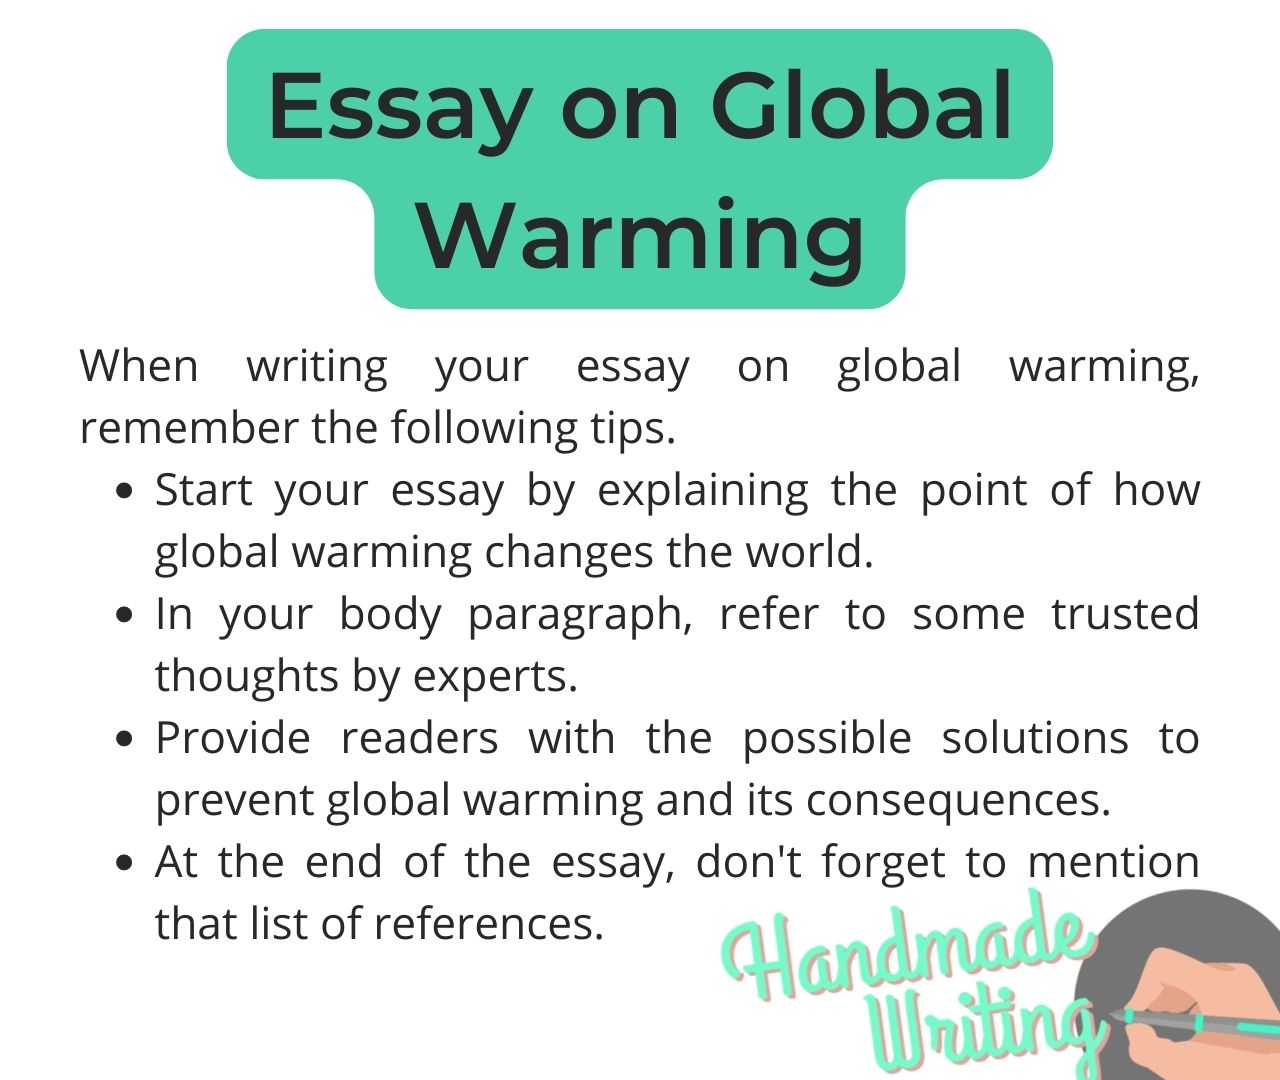 example of informative essay about climate change